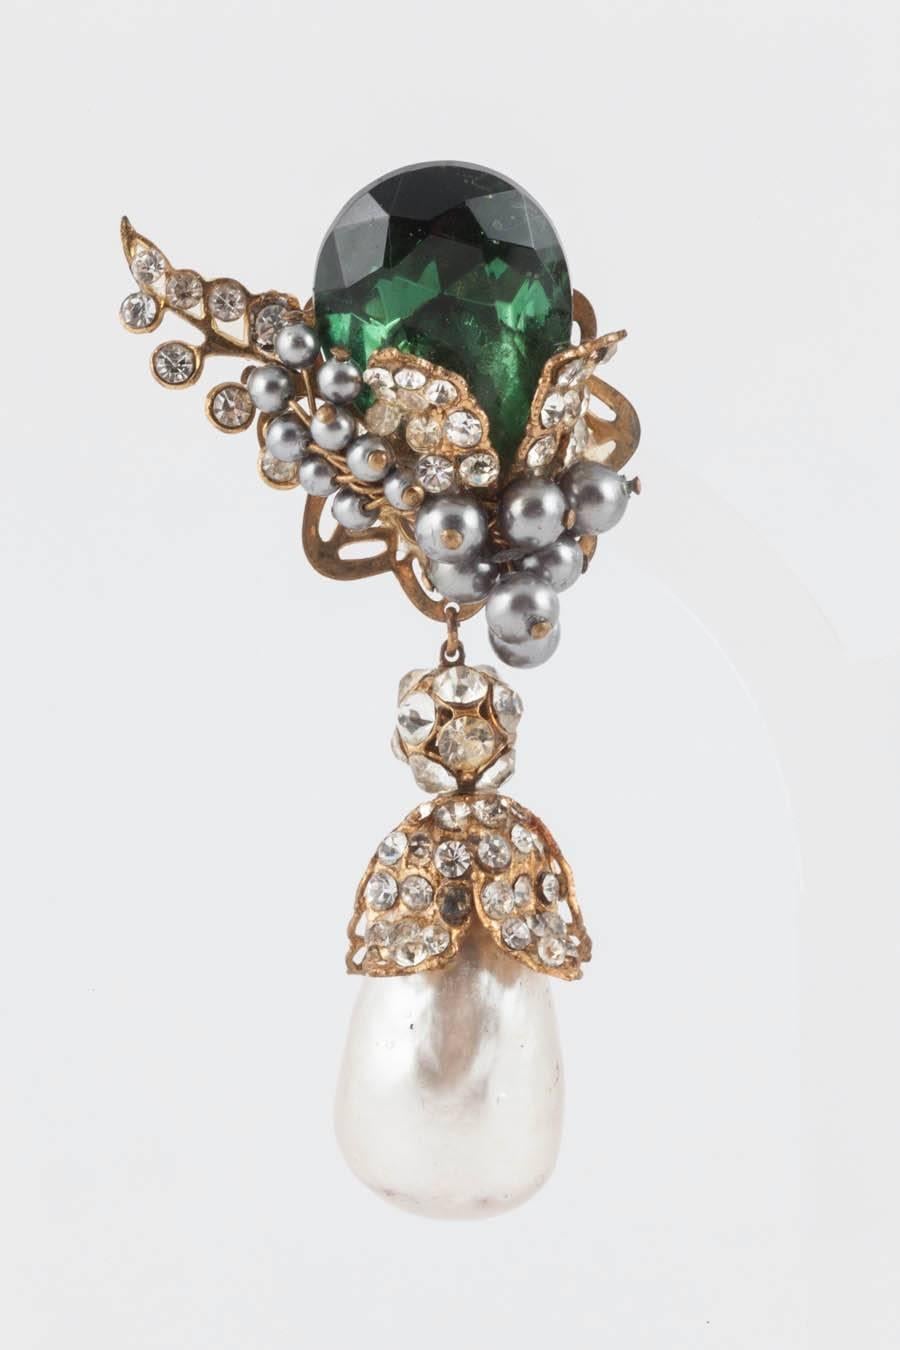 These beautiful large baroque pearl drop earrings, statement pieces, are a lovely combination of emerald, grey and cream, with sparkling paste highlights. Set in gilt filigree metal, they enchant  and glimmer, with the subtlety of regular grey